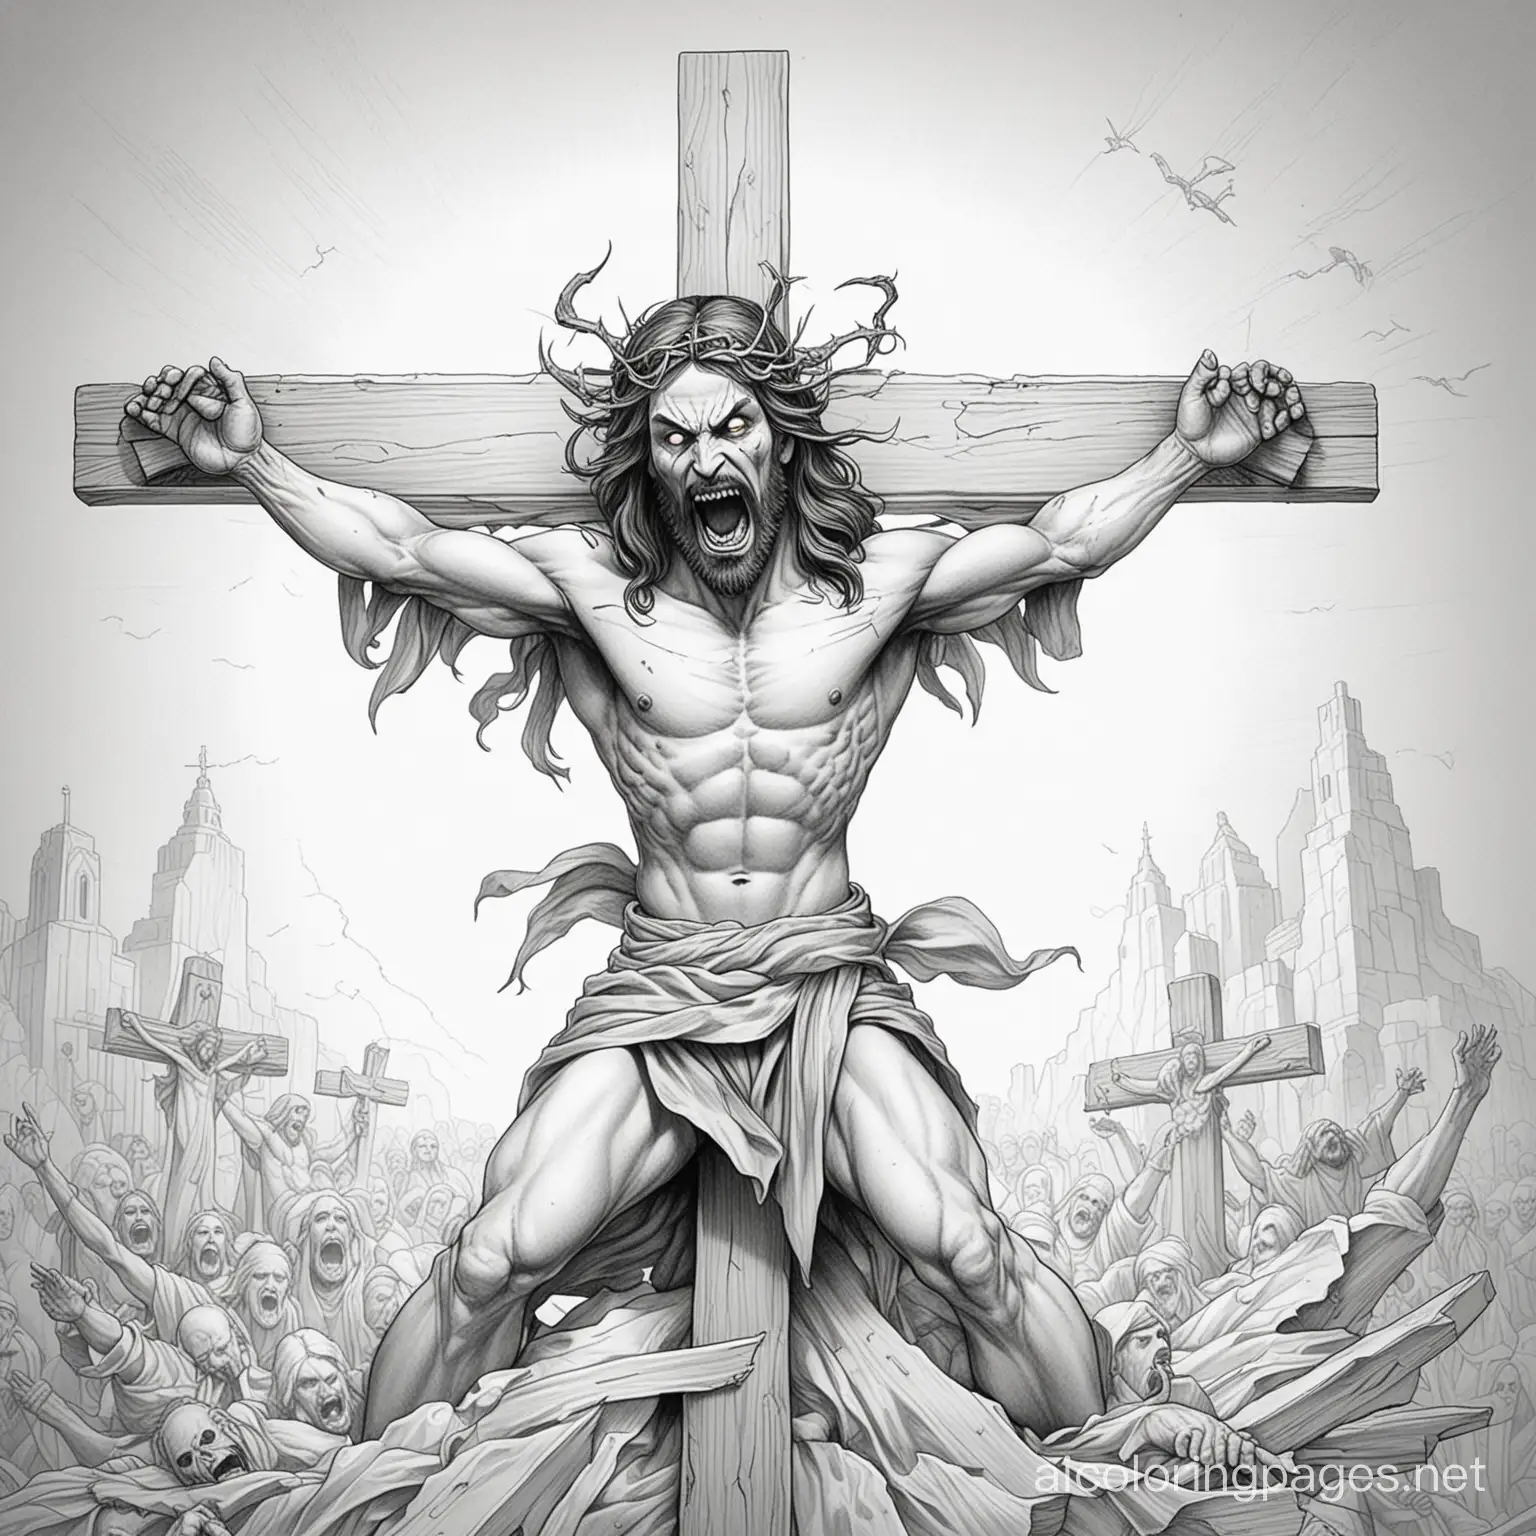 A demon ripping Jesus apart on cross, Coloring Page, black and white, line art, white background, Simplicity, Ample White Space. The background of the coloring page is plain white to make it easy for young children to color within the lines. The outlines of all the subjects are easy to distinguish, making it simple for kids to color without too much difficulty